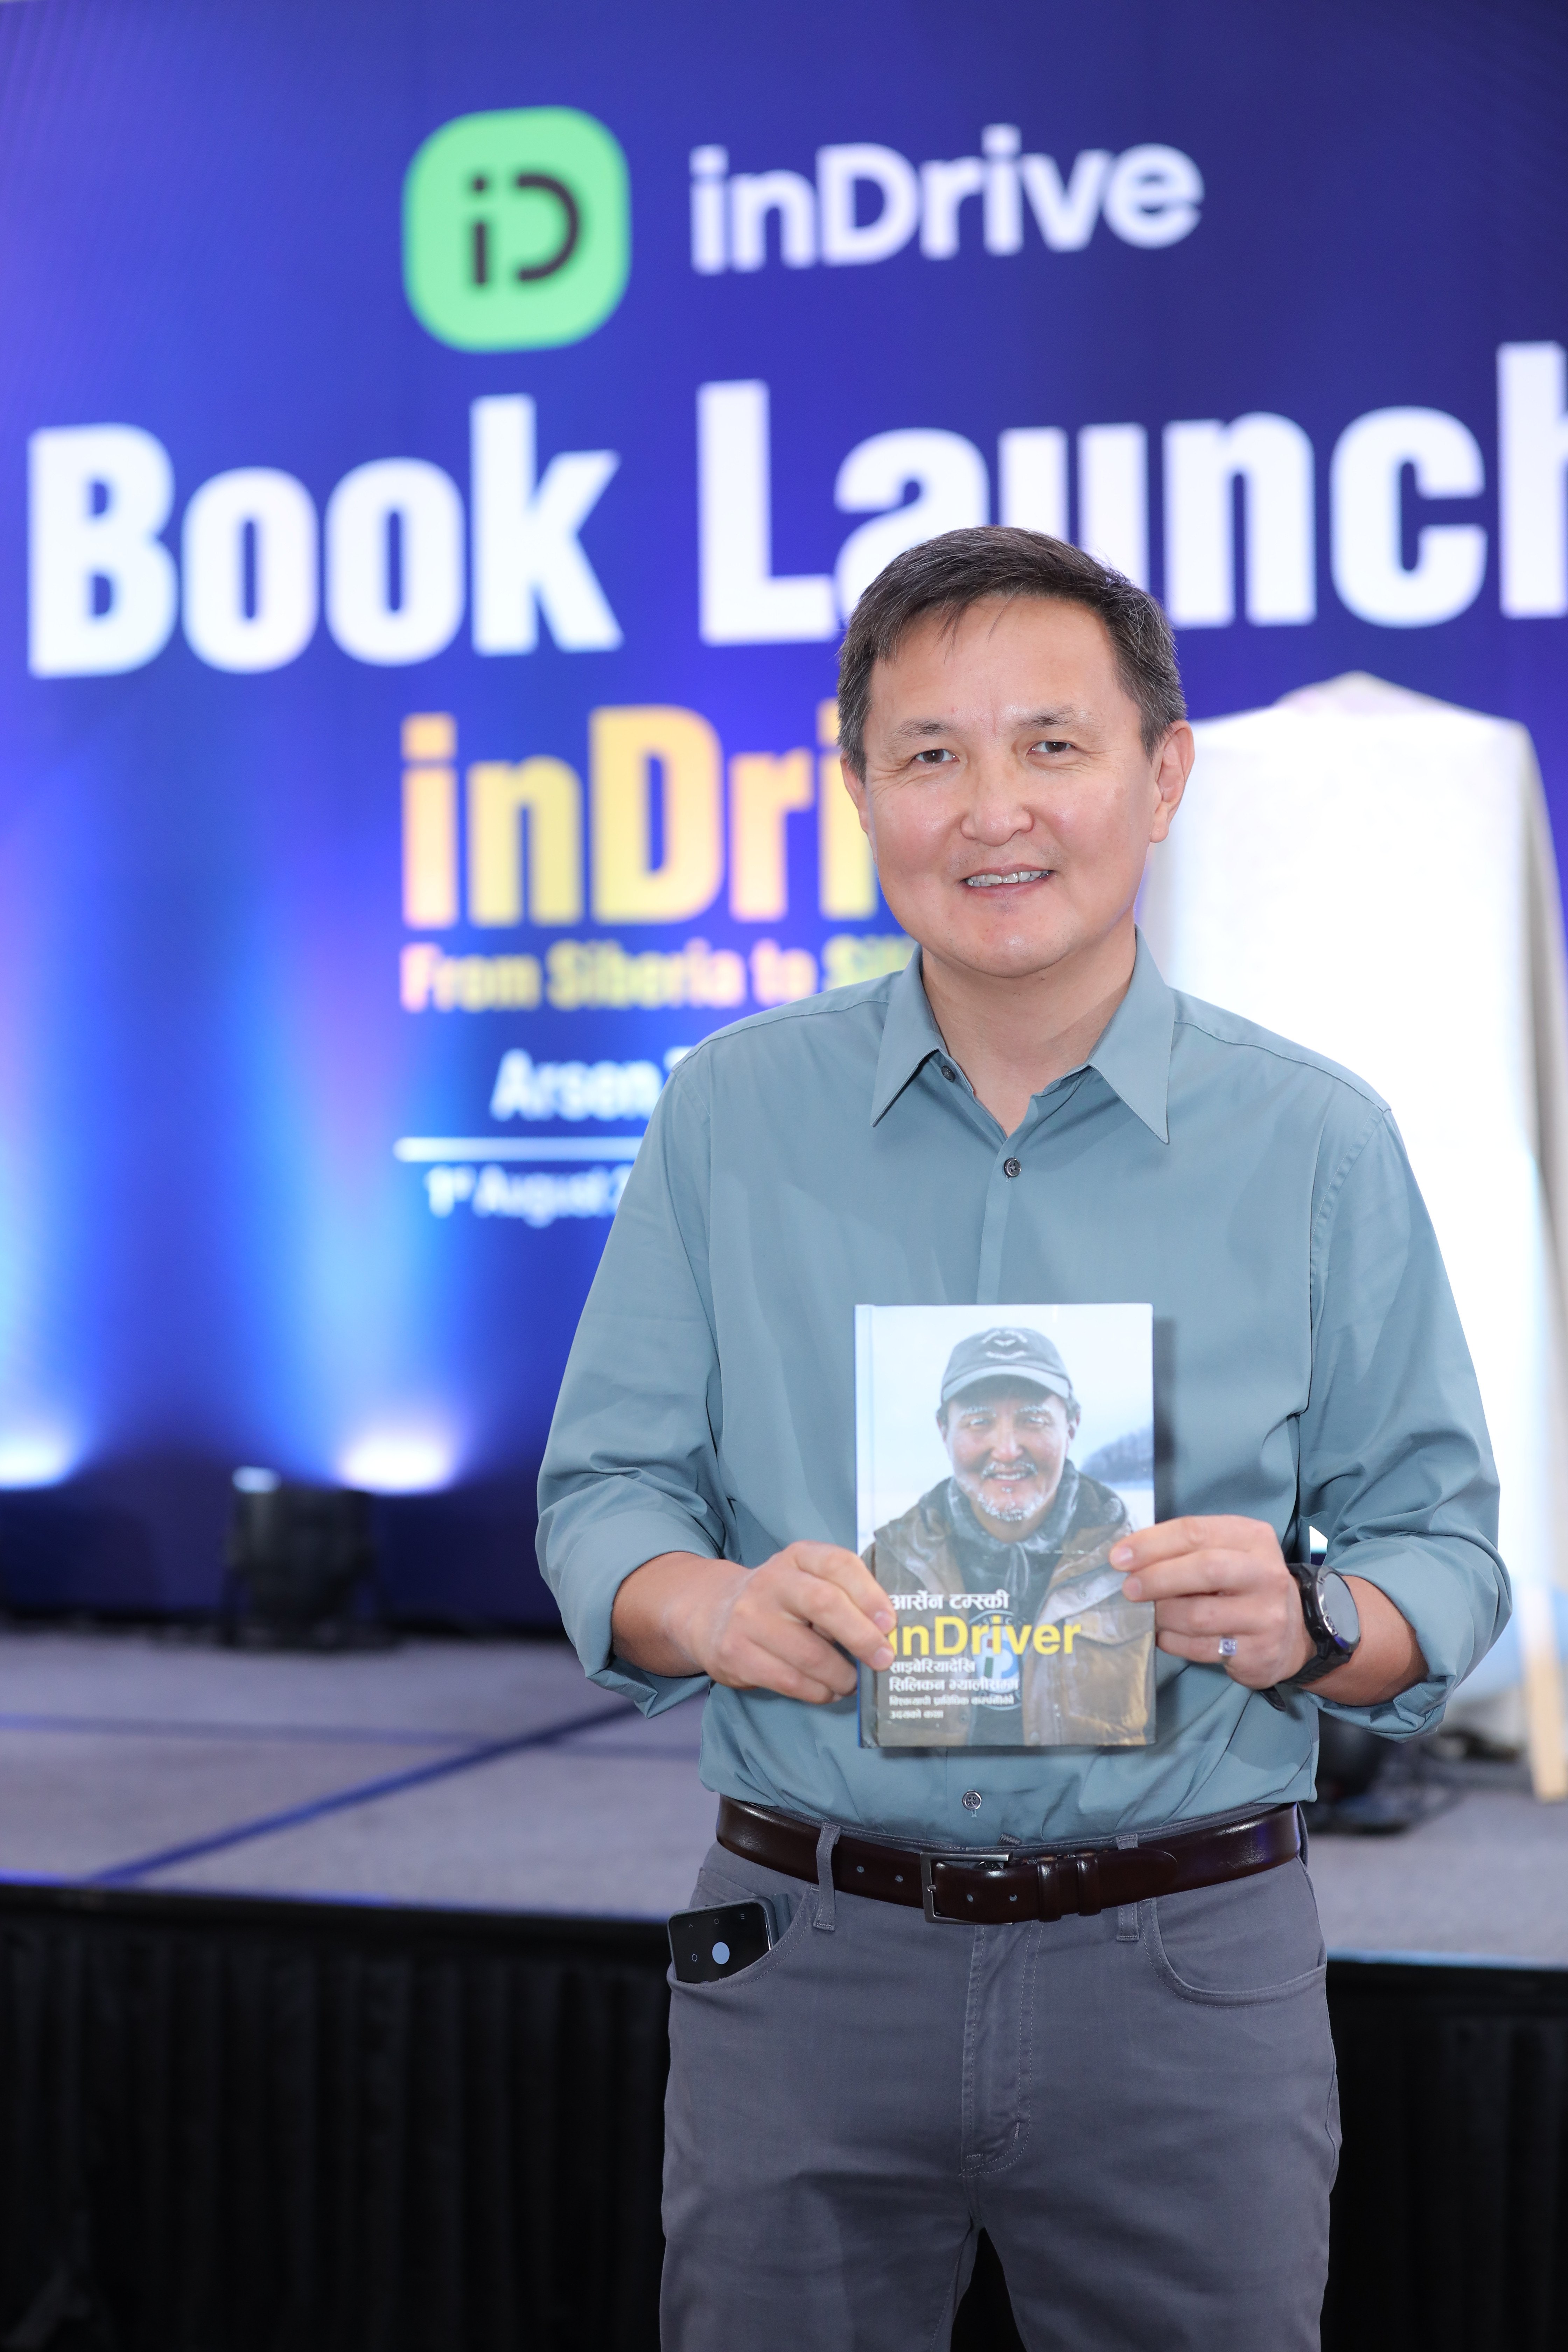 indrive book launch